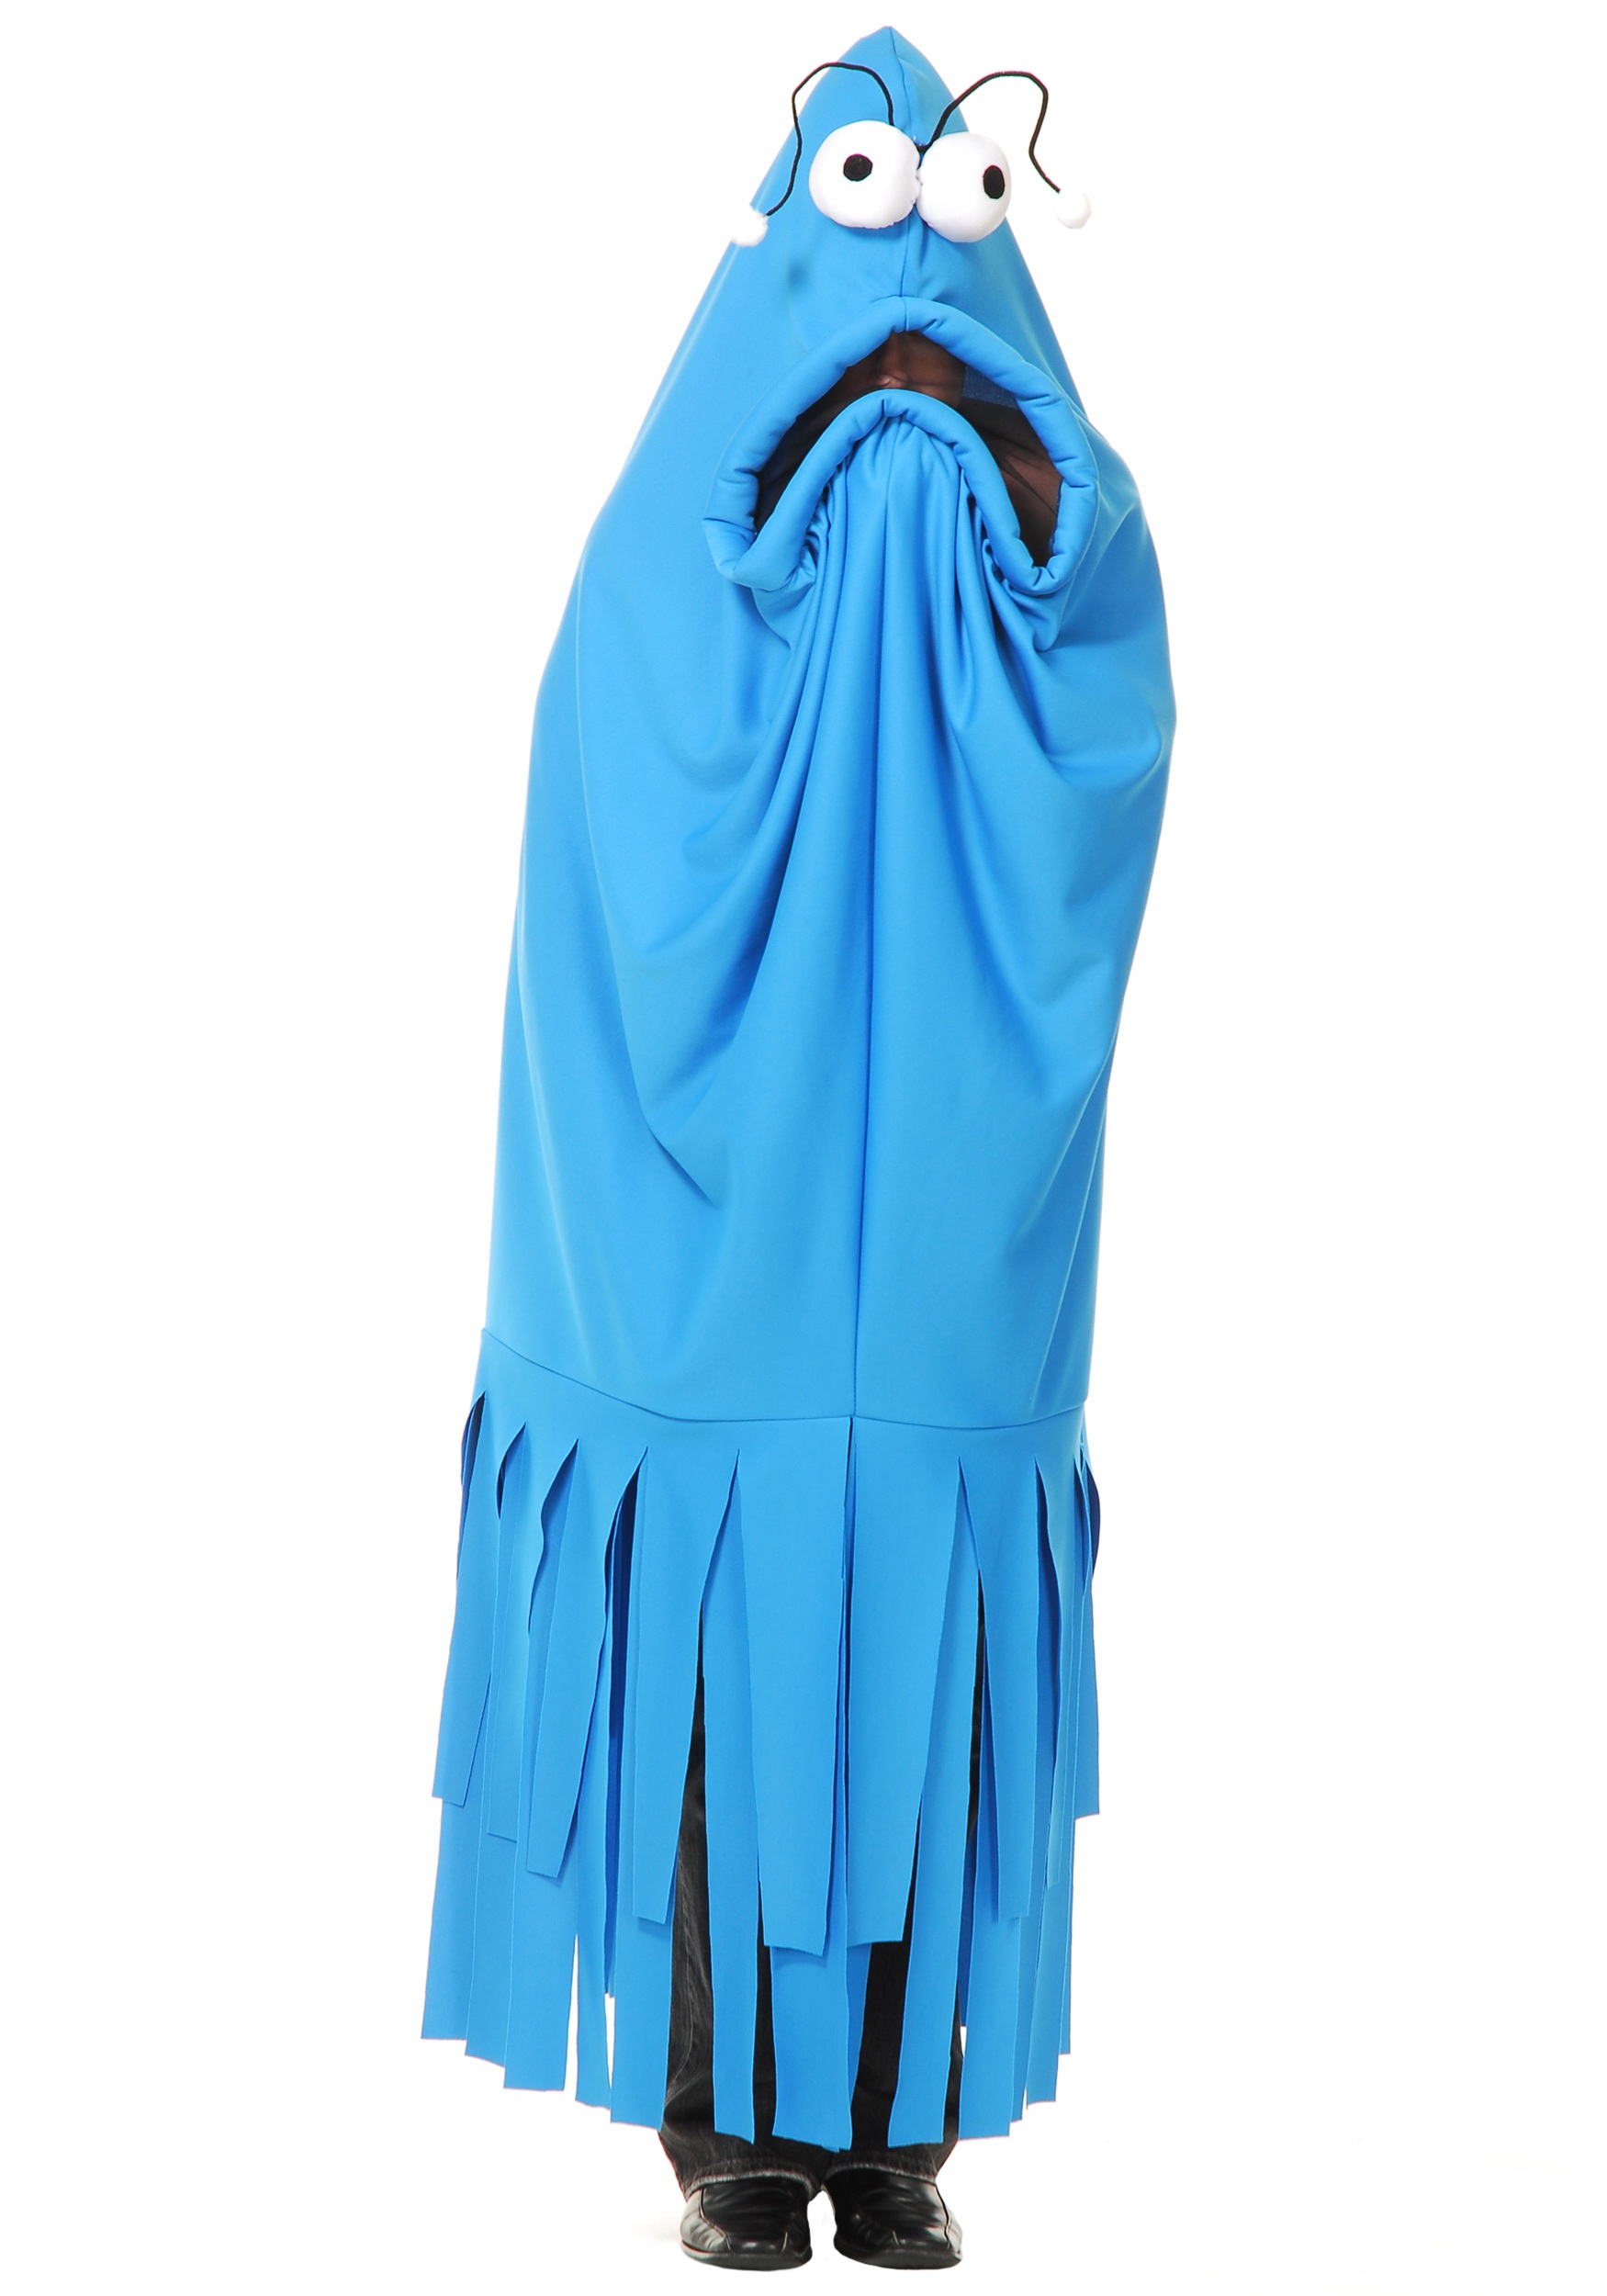 Adult Blue Monster Madness Costume | This Adult Blue Monster Madness Costum...